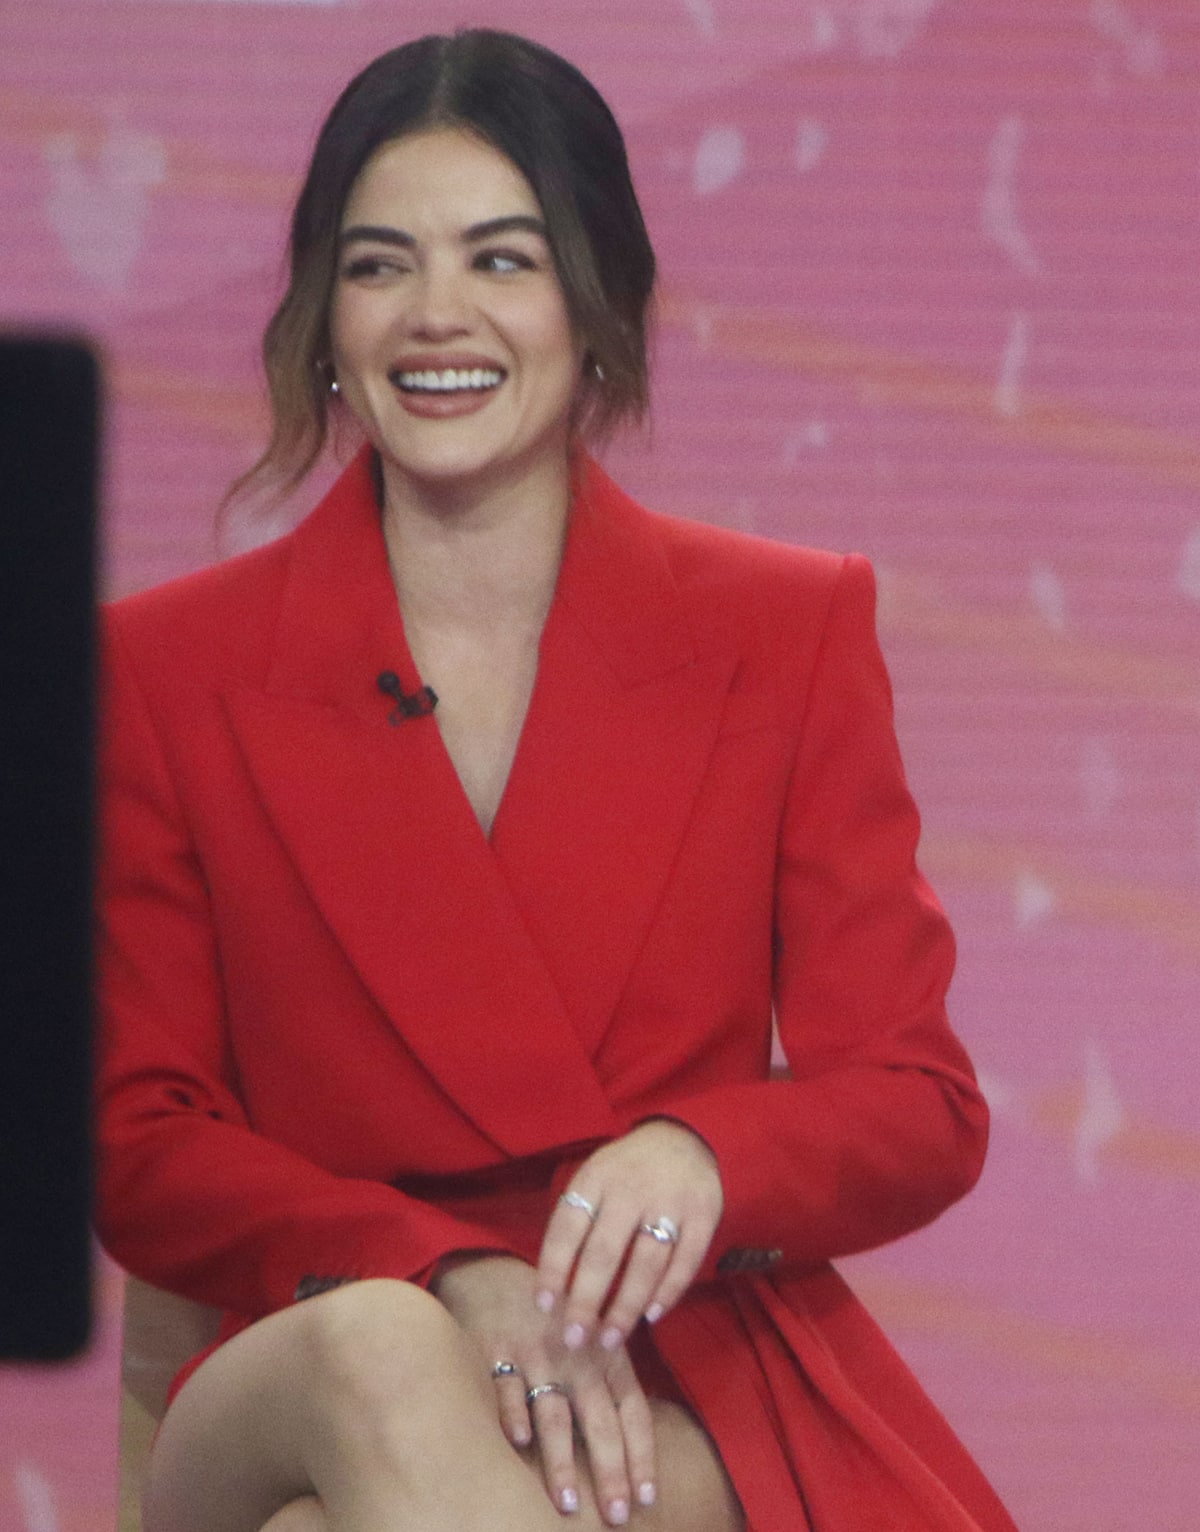 Lucy Hale embraces the season's red trend in a red Alexander McQueen crop tuxedo jacket and matching shorts